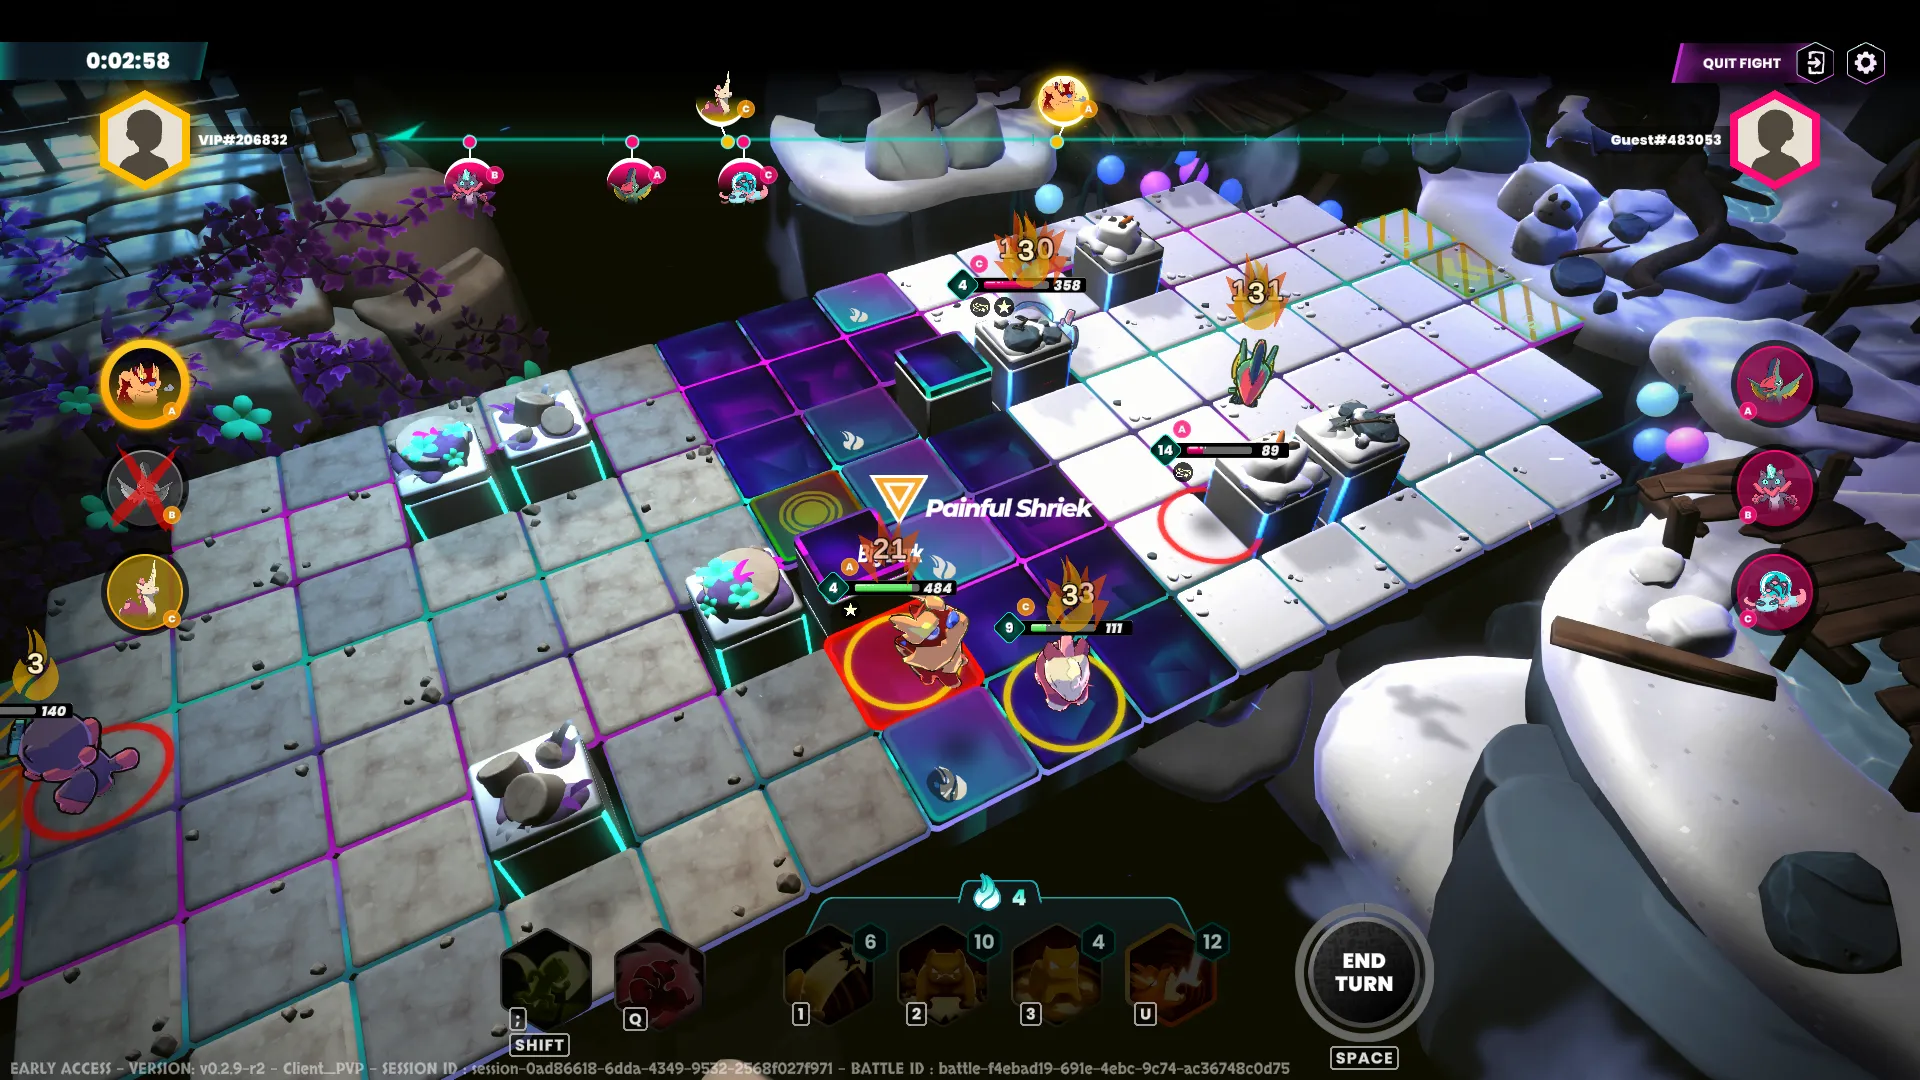 Nefties can use skills to knock out opponents. You only need Hype Cells to cast them; the number of hype cells required for each skill is displayed in the middle of the screen.